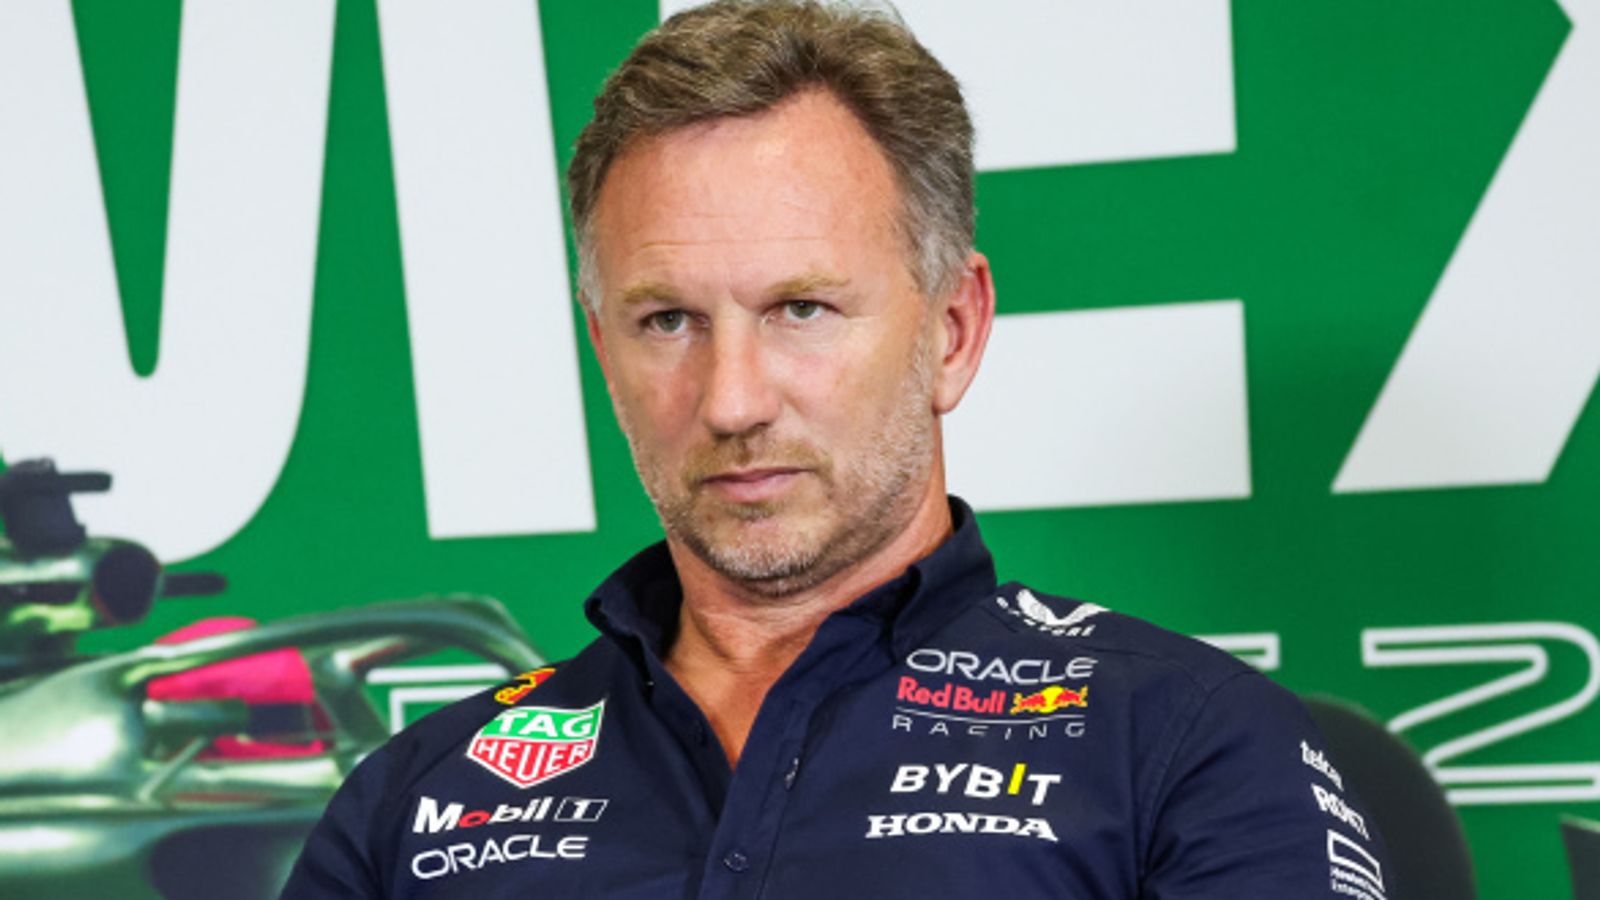 Christian Horner: No resolution to Red Bull investigation into team principal after first interview | F1 News